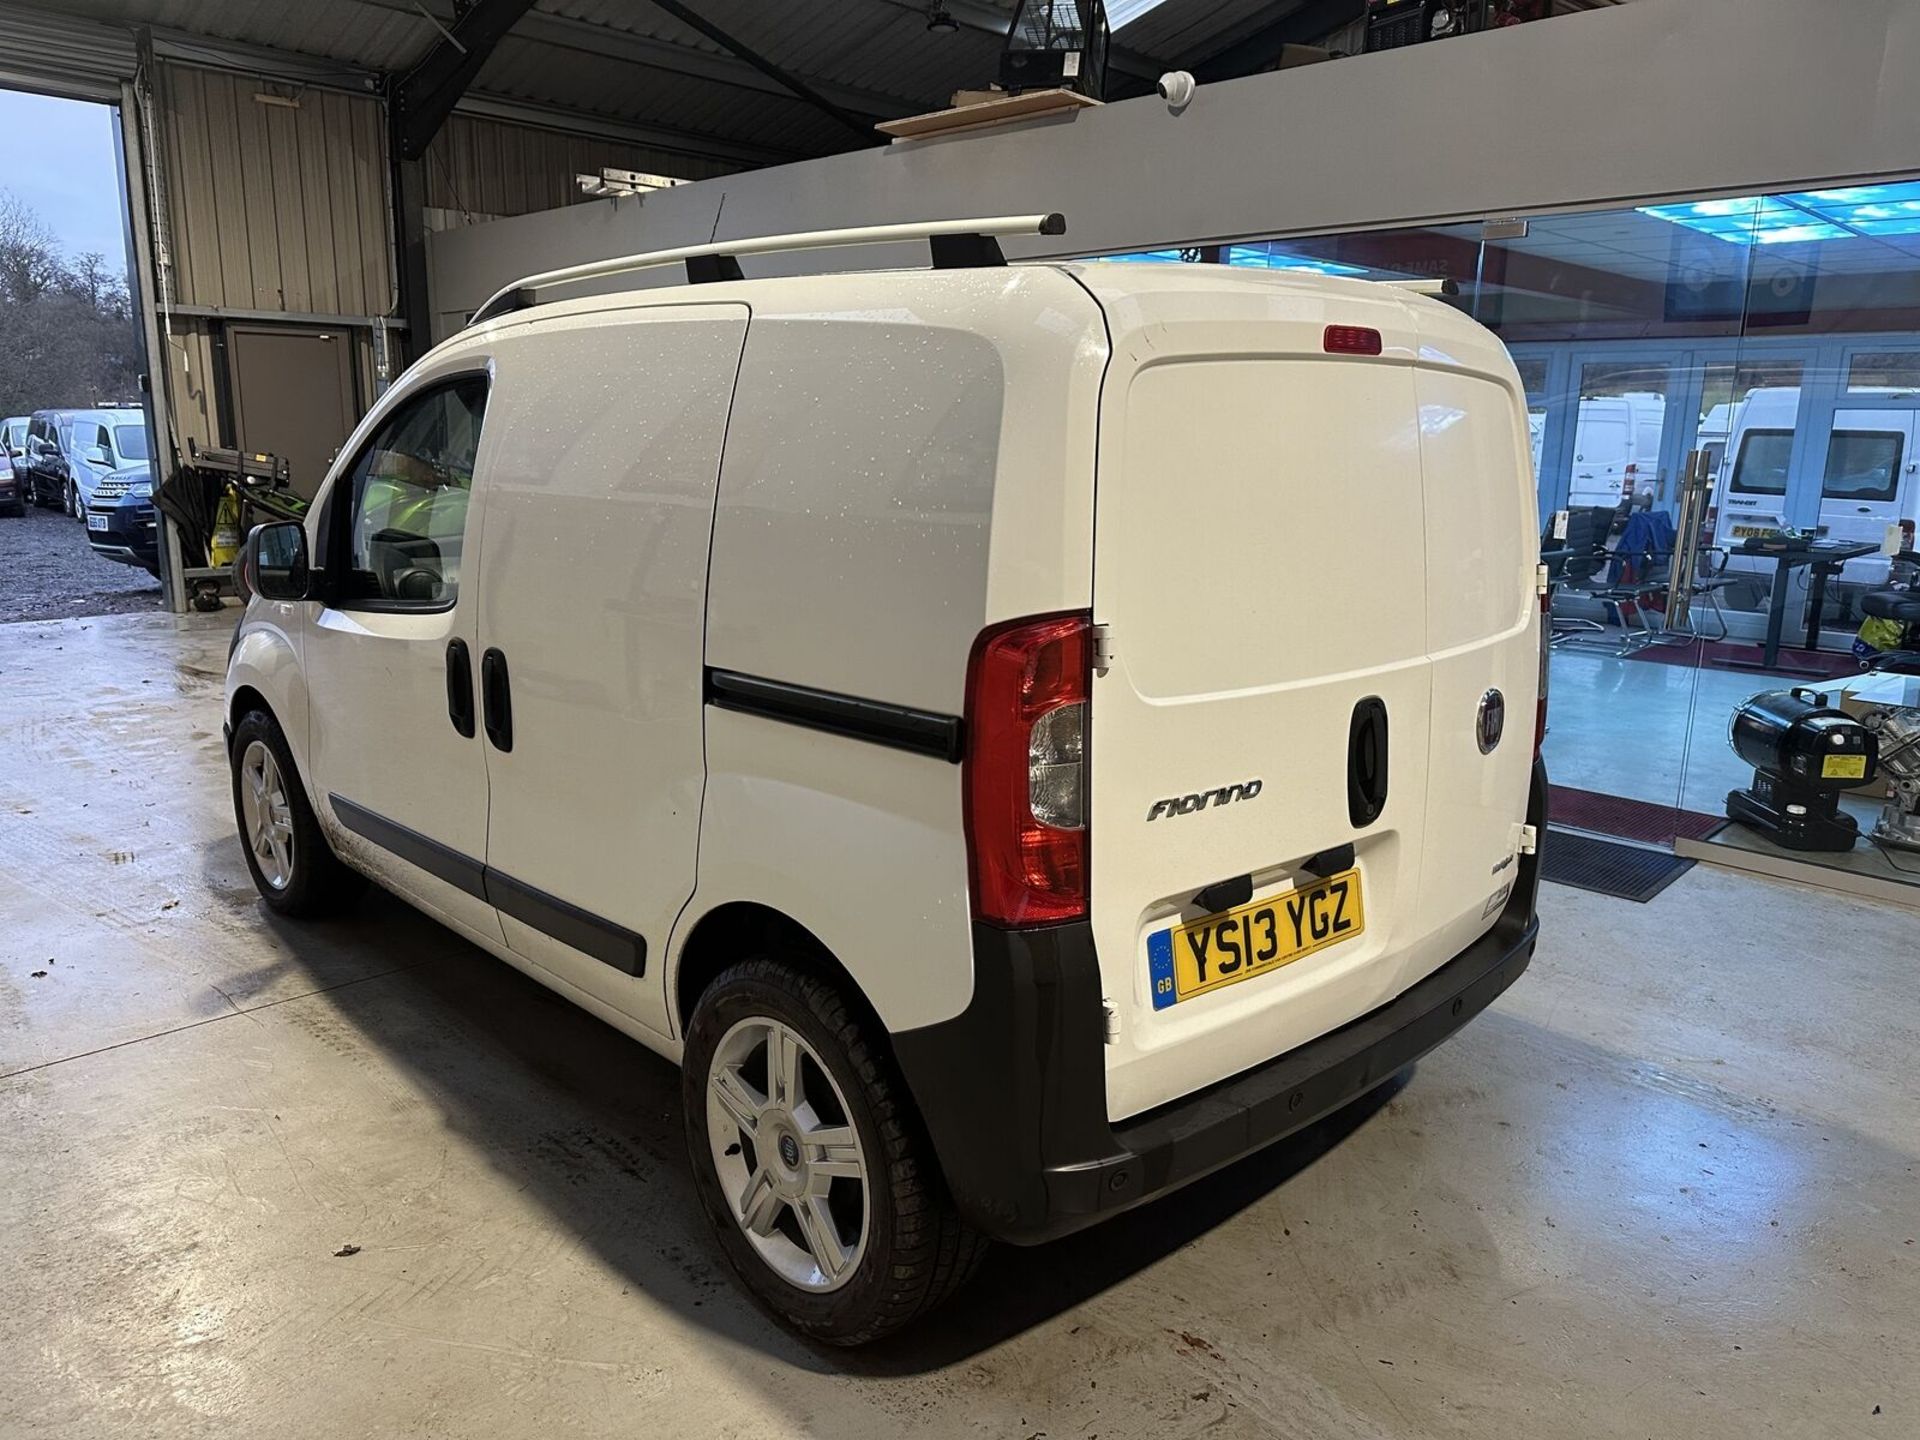 **(ONLY 85K MILES)** 2013 FIAT FIORINO CARGO AUTO: PRISTINE, SMOOTH DRIVE - (NO VAT ON HAMMER) - Image 14 of 15